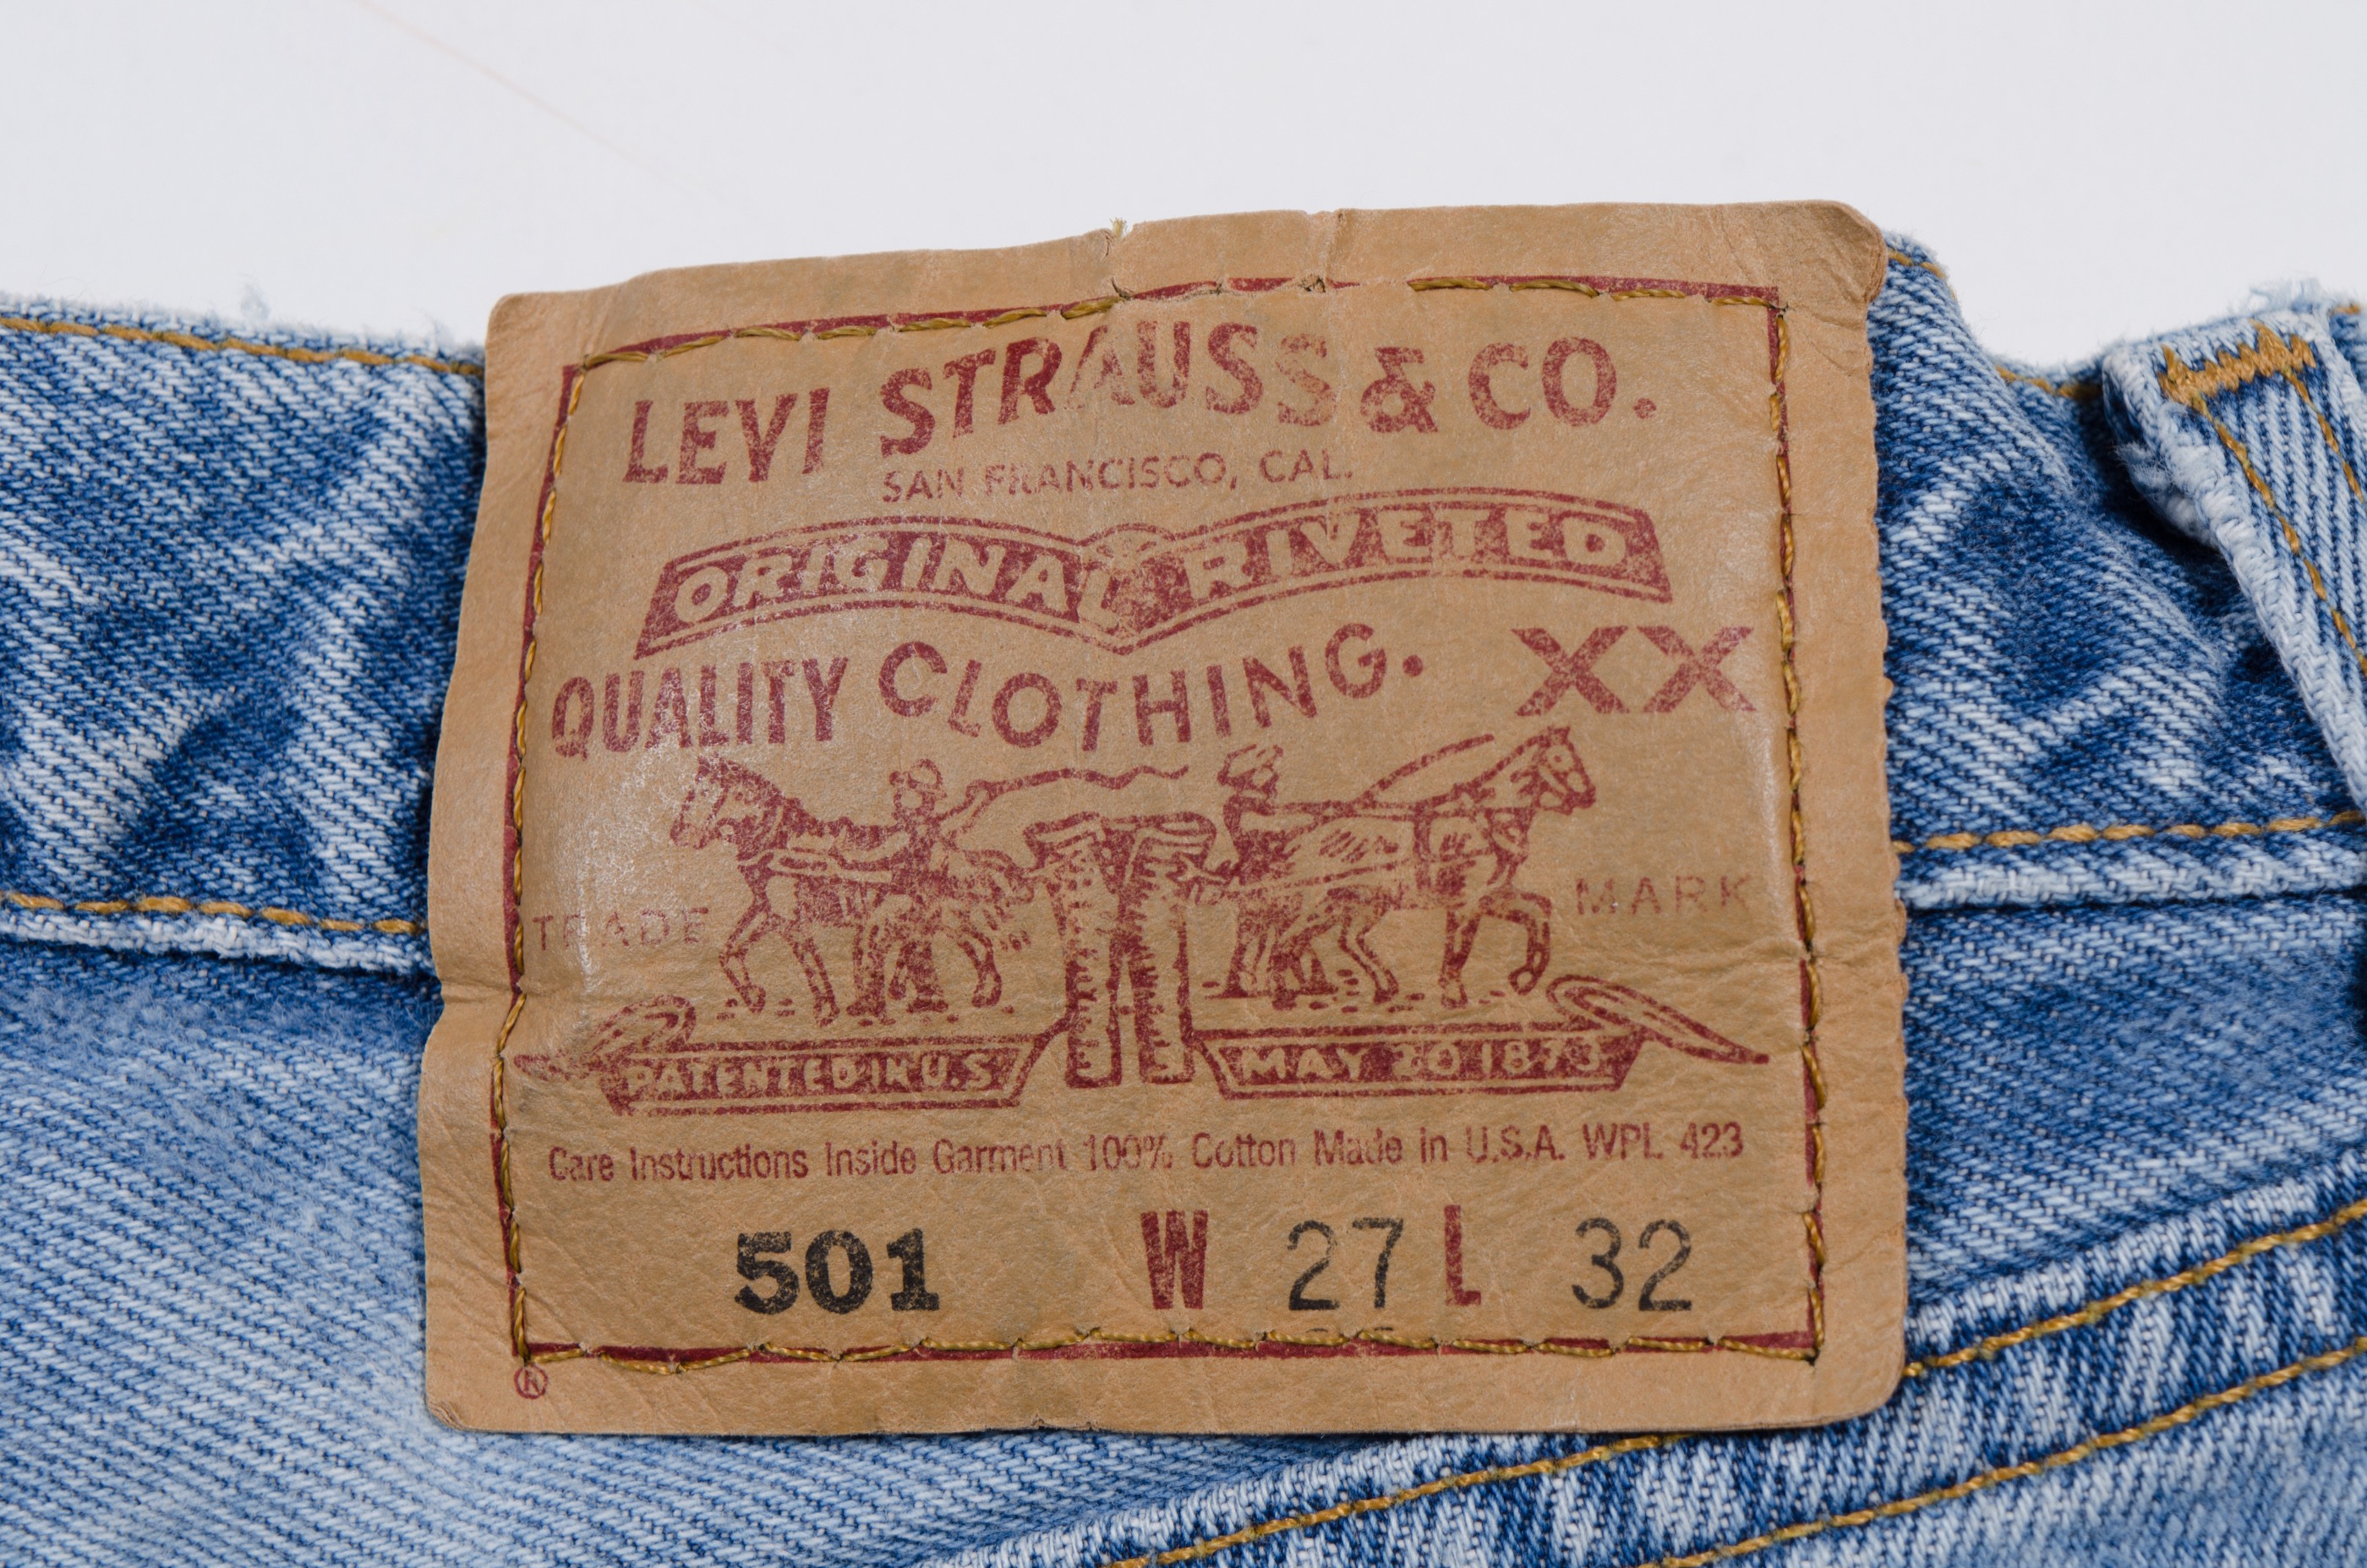 Celebrating the Birth of the Jean - Levi Strauss & Co : Levi Strauss & Co